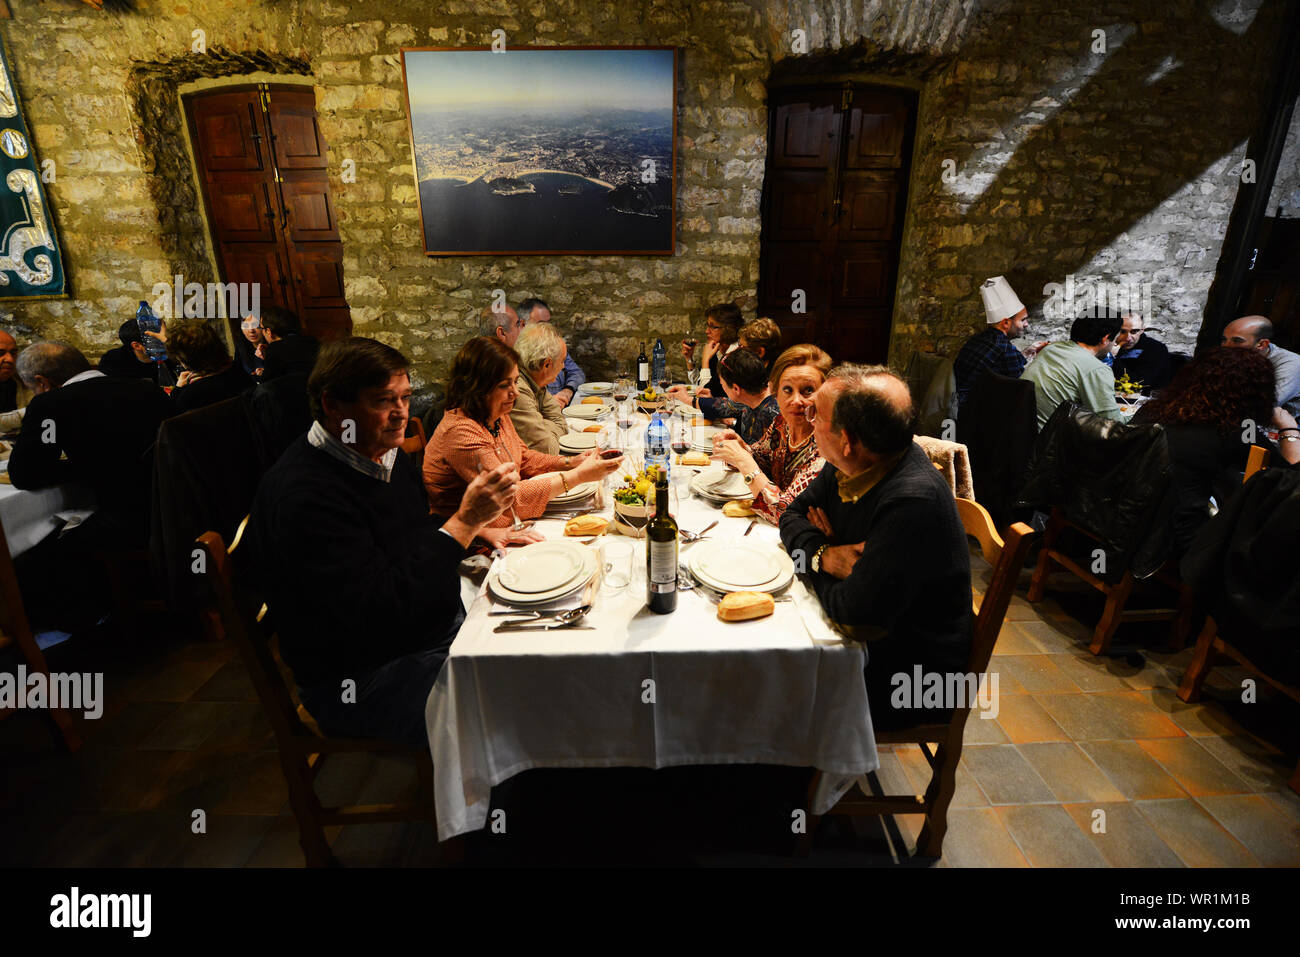 A feast at the Gastronomic club in the old town of San Sebastian. Stock Photo